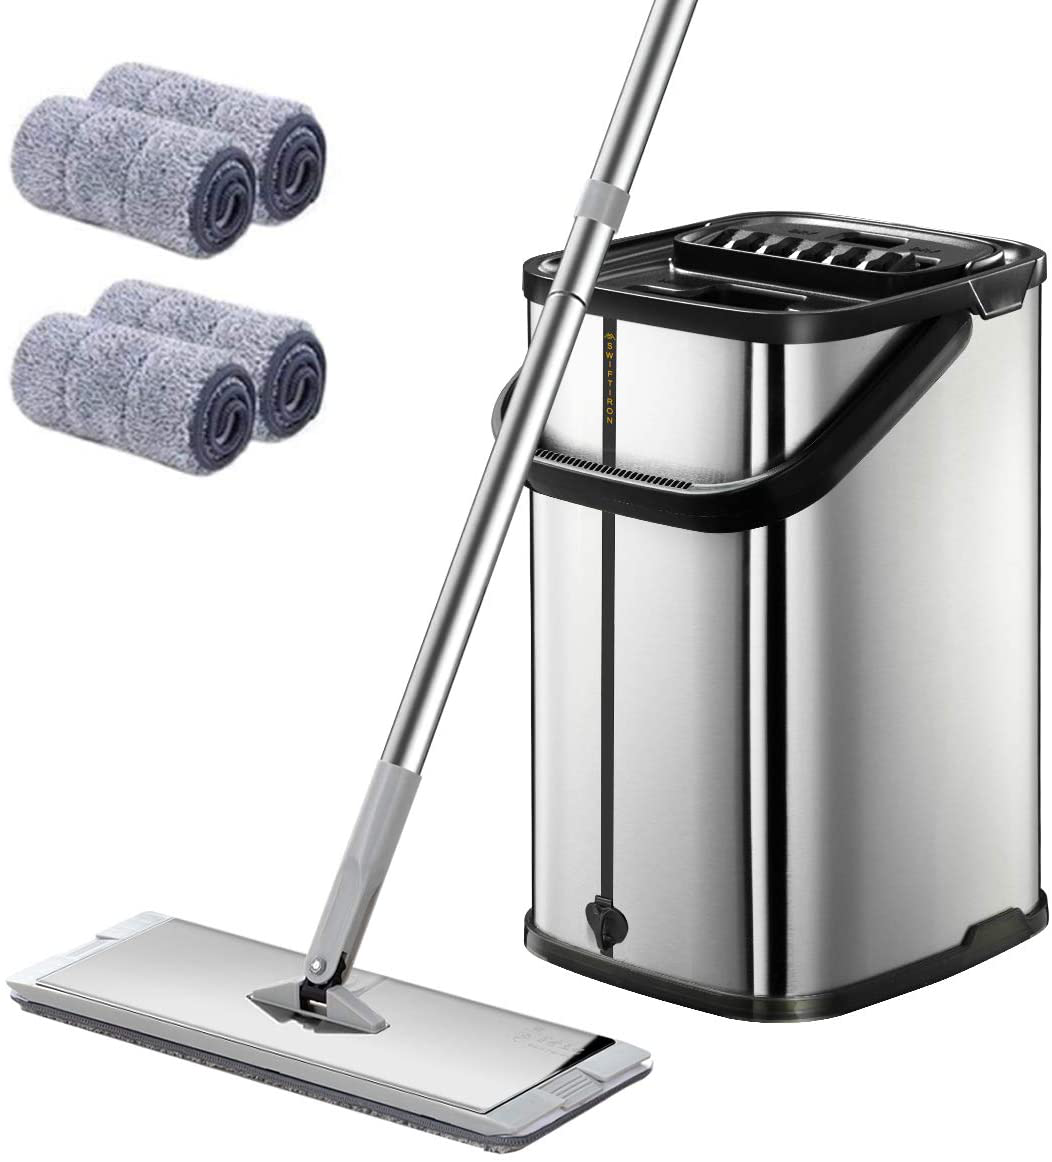 Silver Squeeze Flat Floor Mop and Bucket Set, Stainless Steel Handle Adjustable, 4 Washable & Reusable Microfiber Mop Pads, Professional Commercial Home Mops for Floor Cleaning